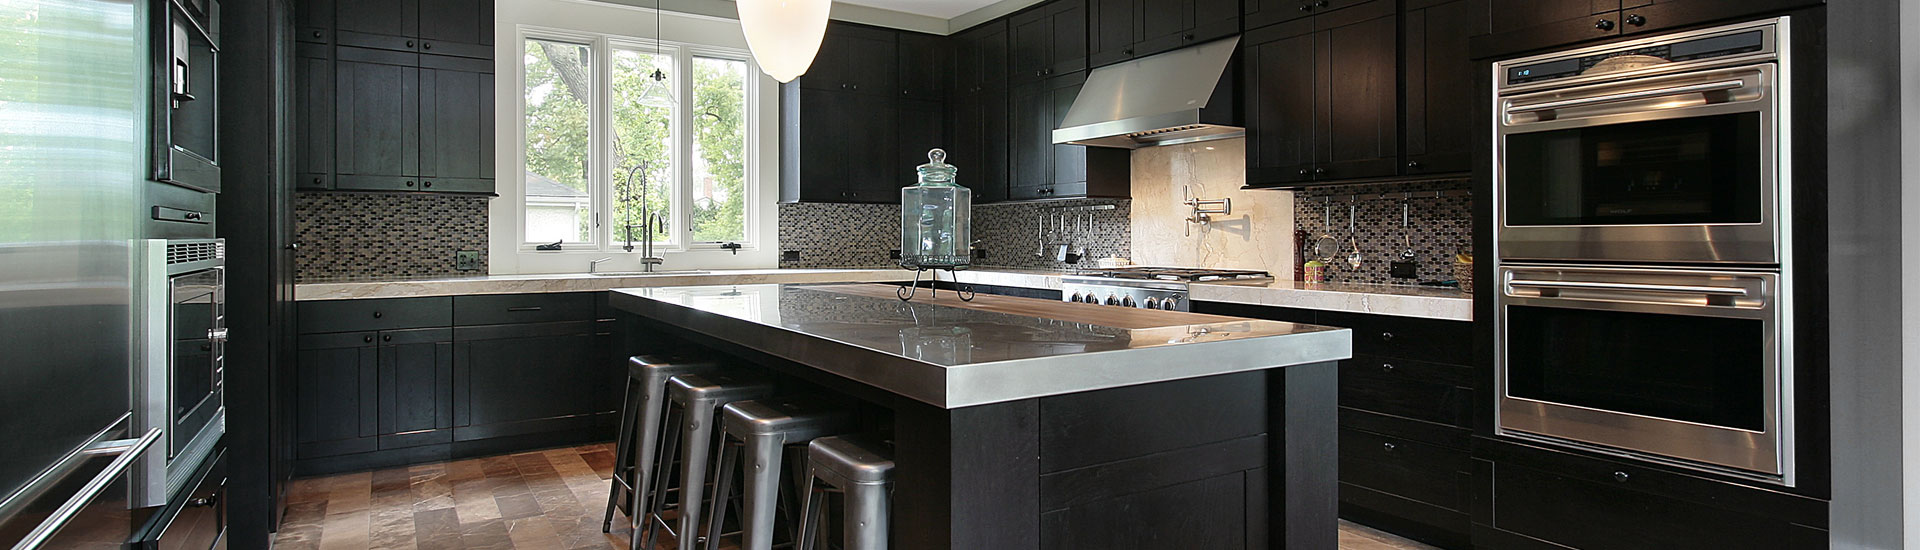 Kitchen with Dark Wood Cabinetry